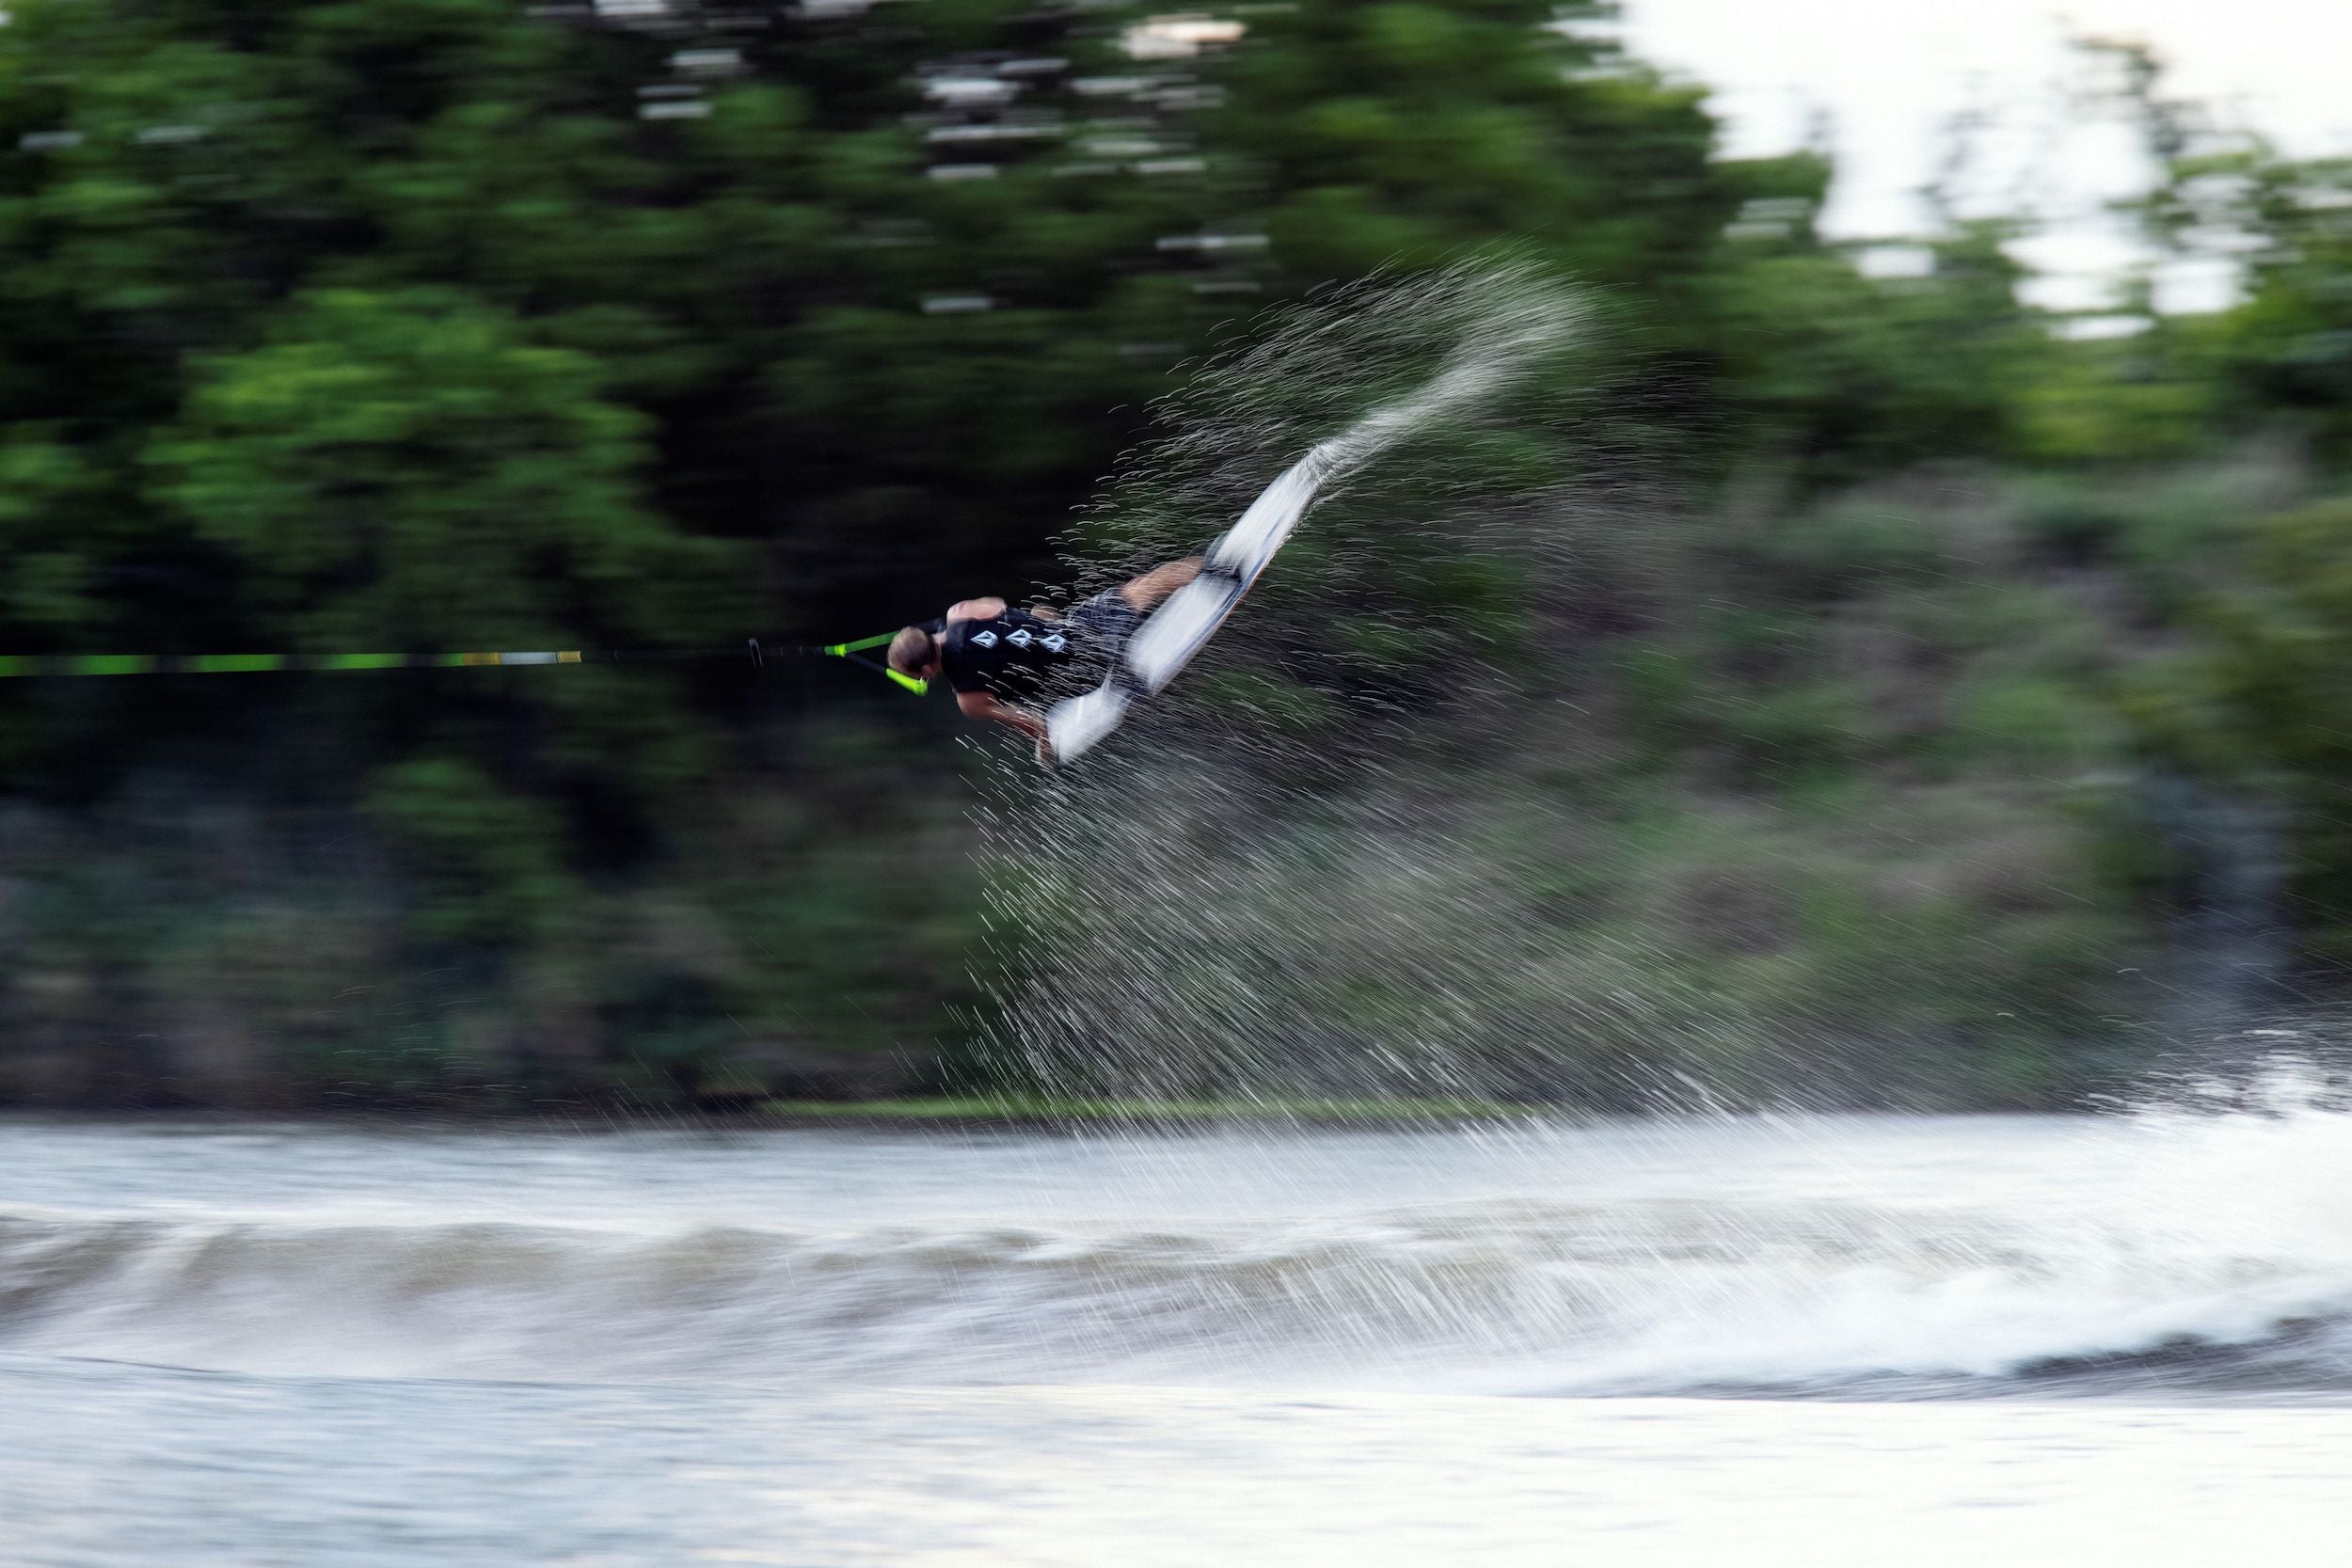 A person is riding a wakeboard in the water while wearing a Ronix 2024 Volcom Men's CE Impact Vest made of 4-way stretch material.